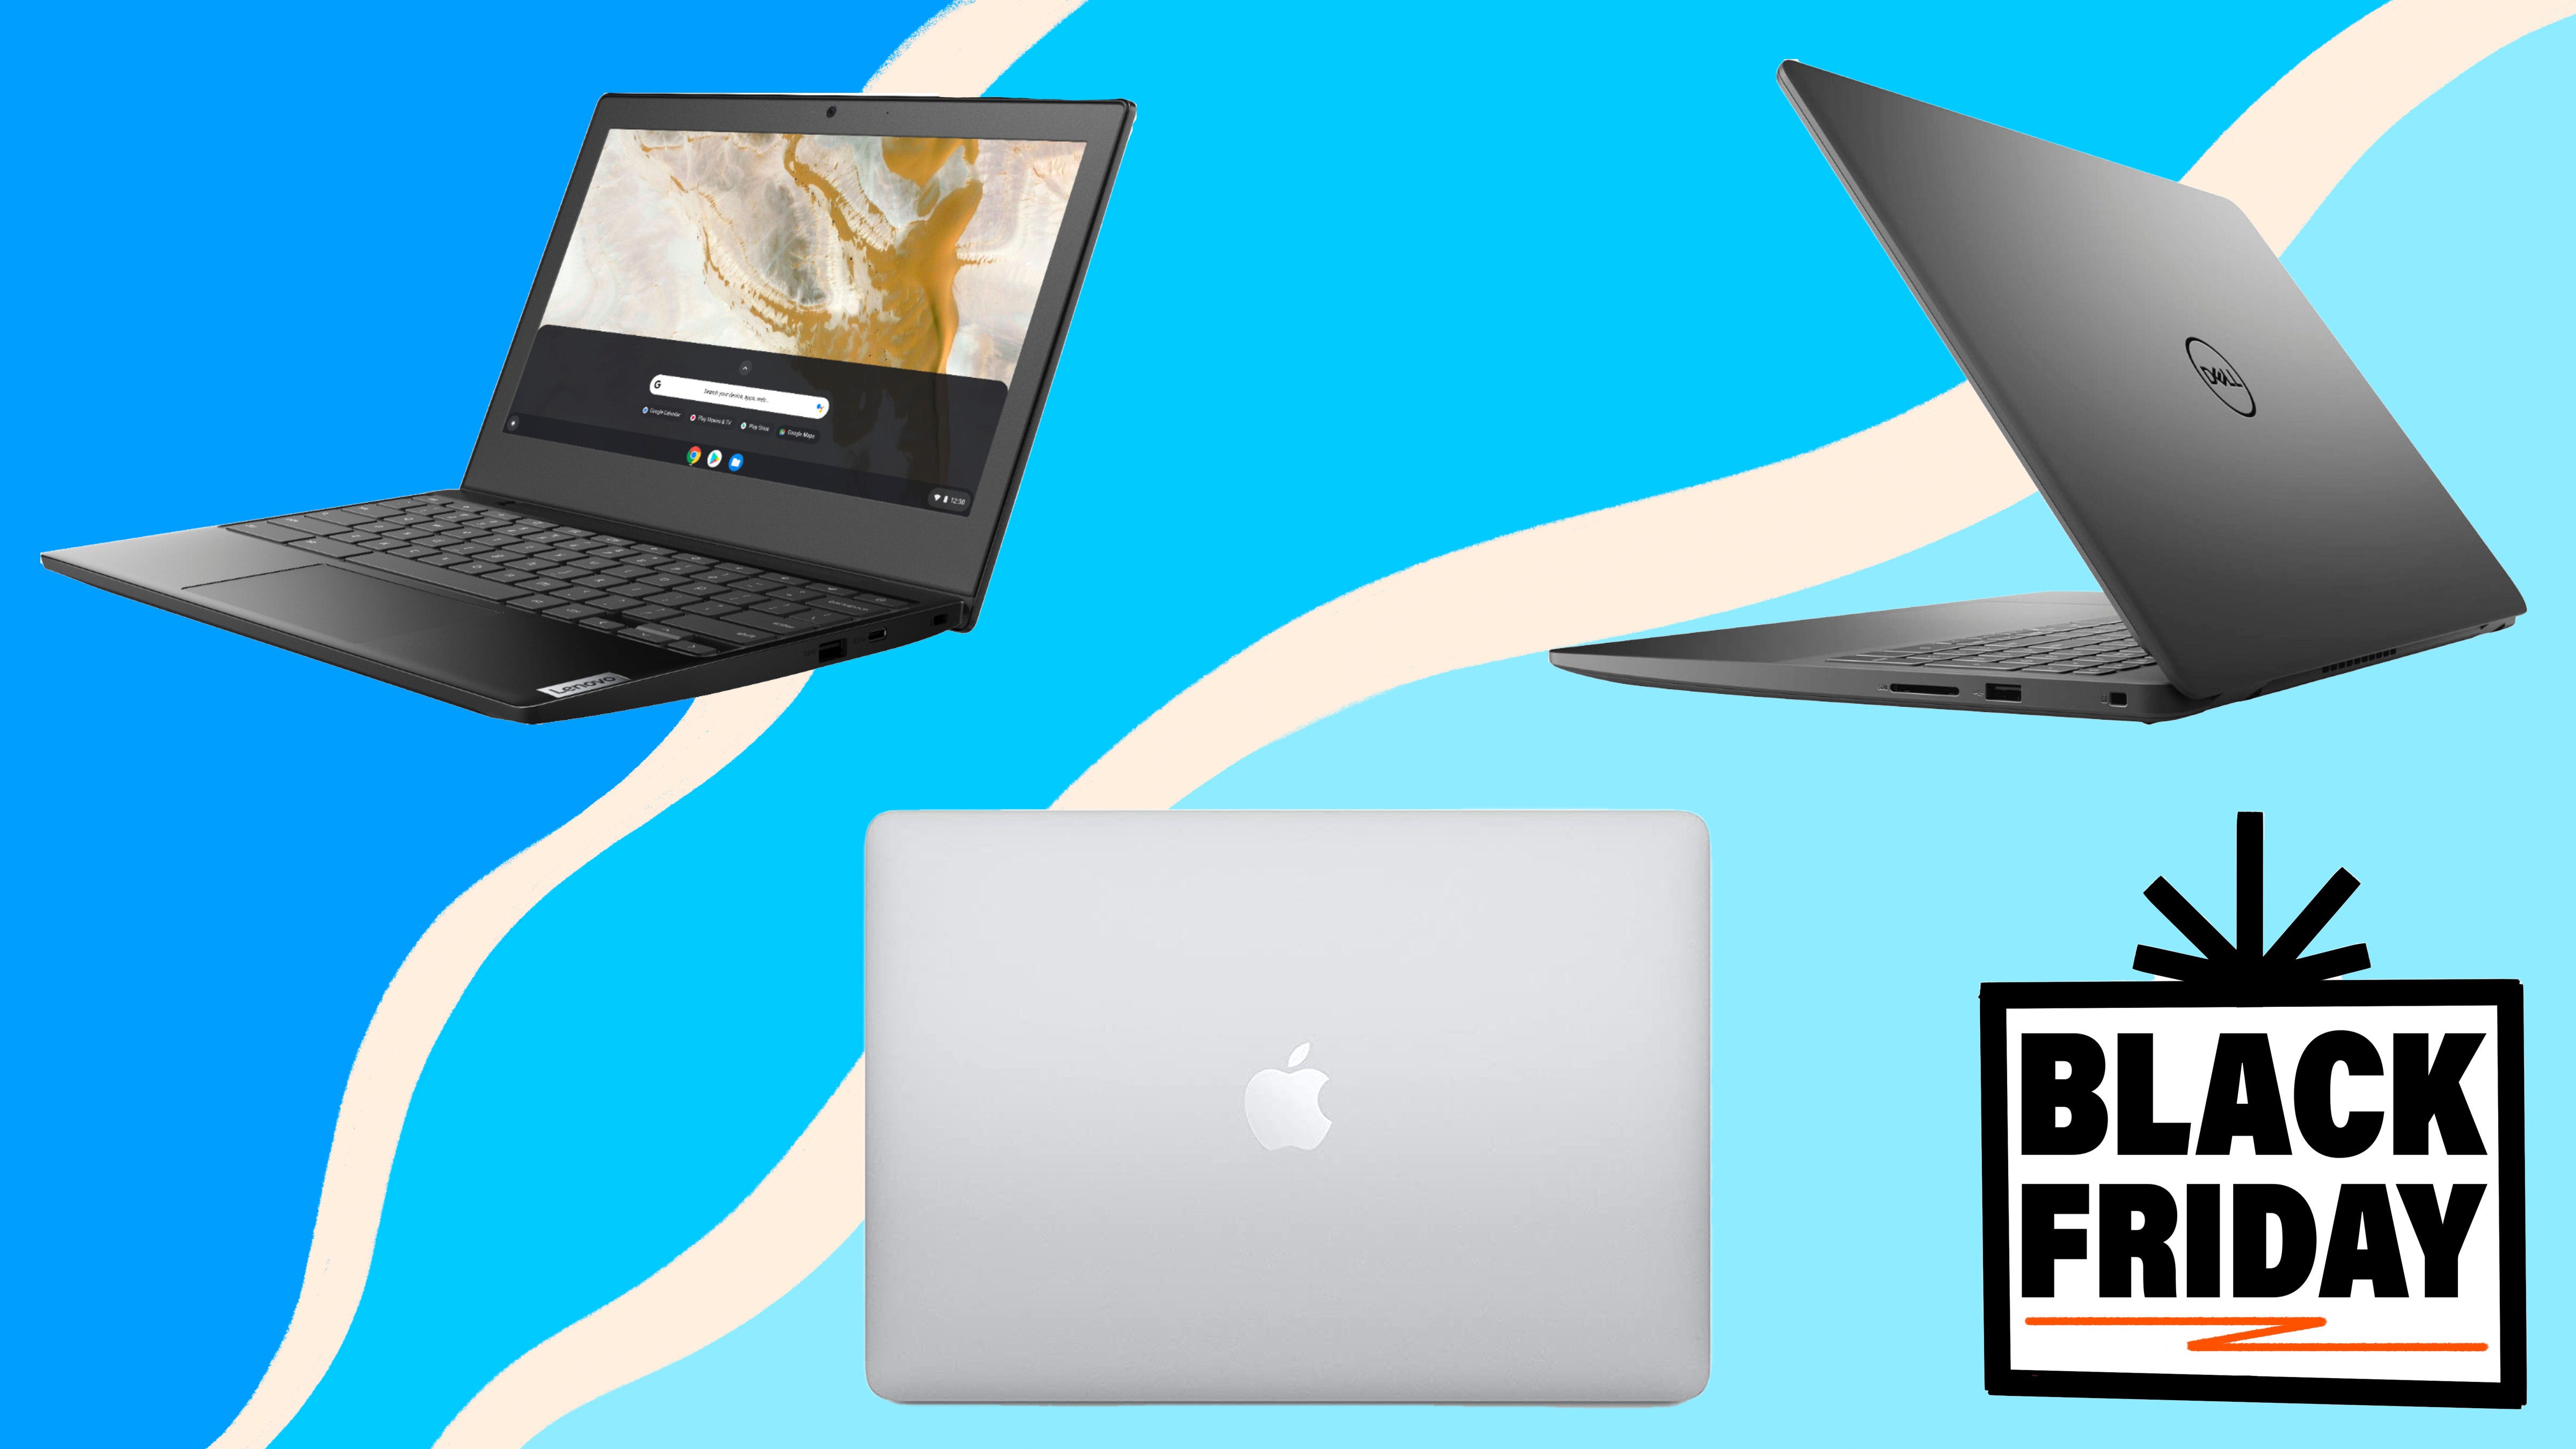 The best Black Friday 2021 laptop deals you can get at HP, Best Buy and more